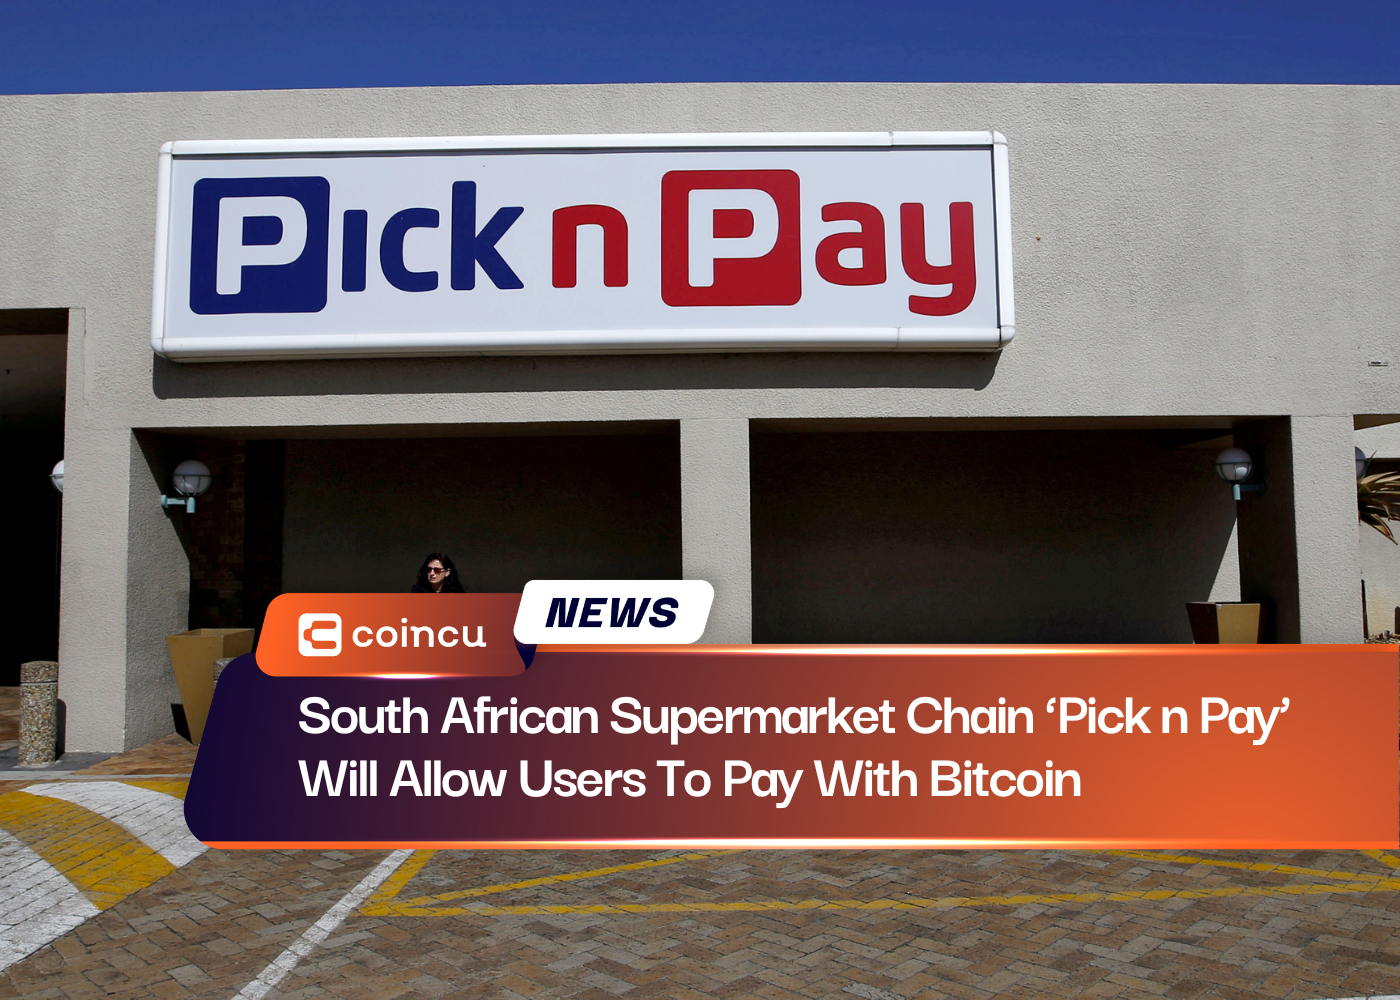 South African Supermarket Chain ‘Pick n Pay’ Will Allow Users To Pay With Bitcoin